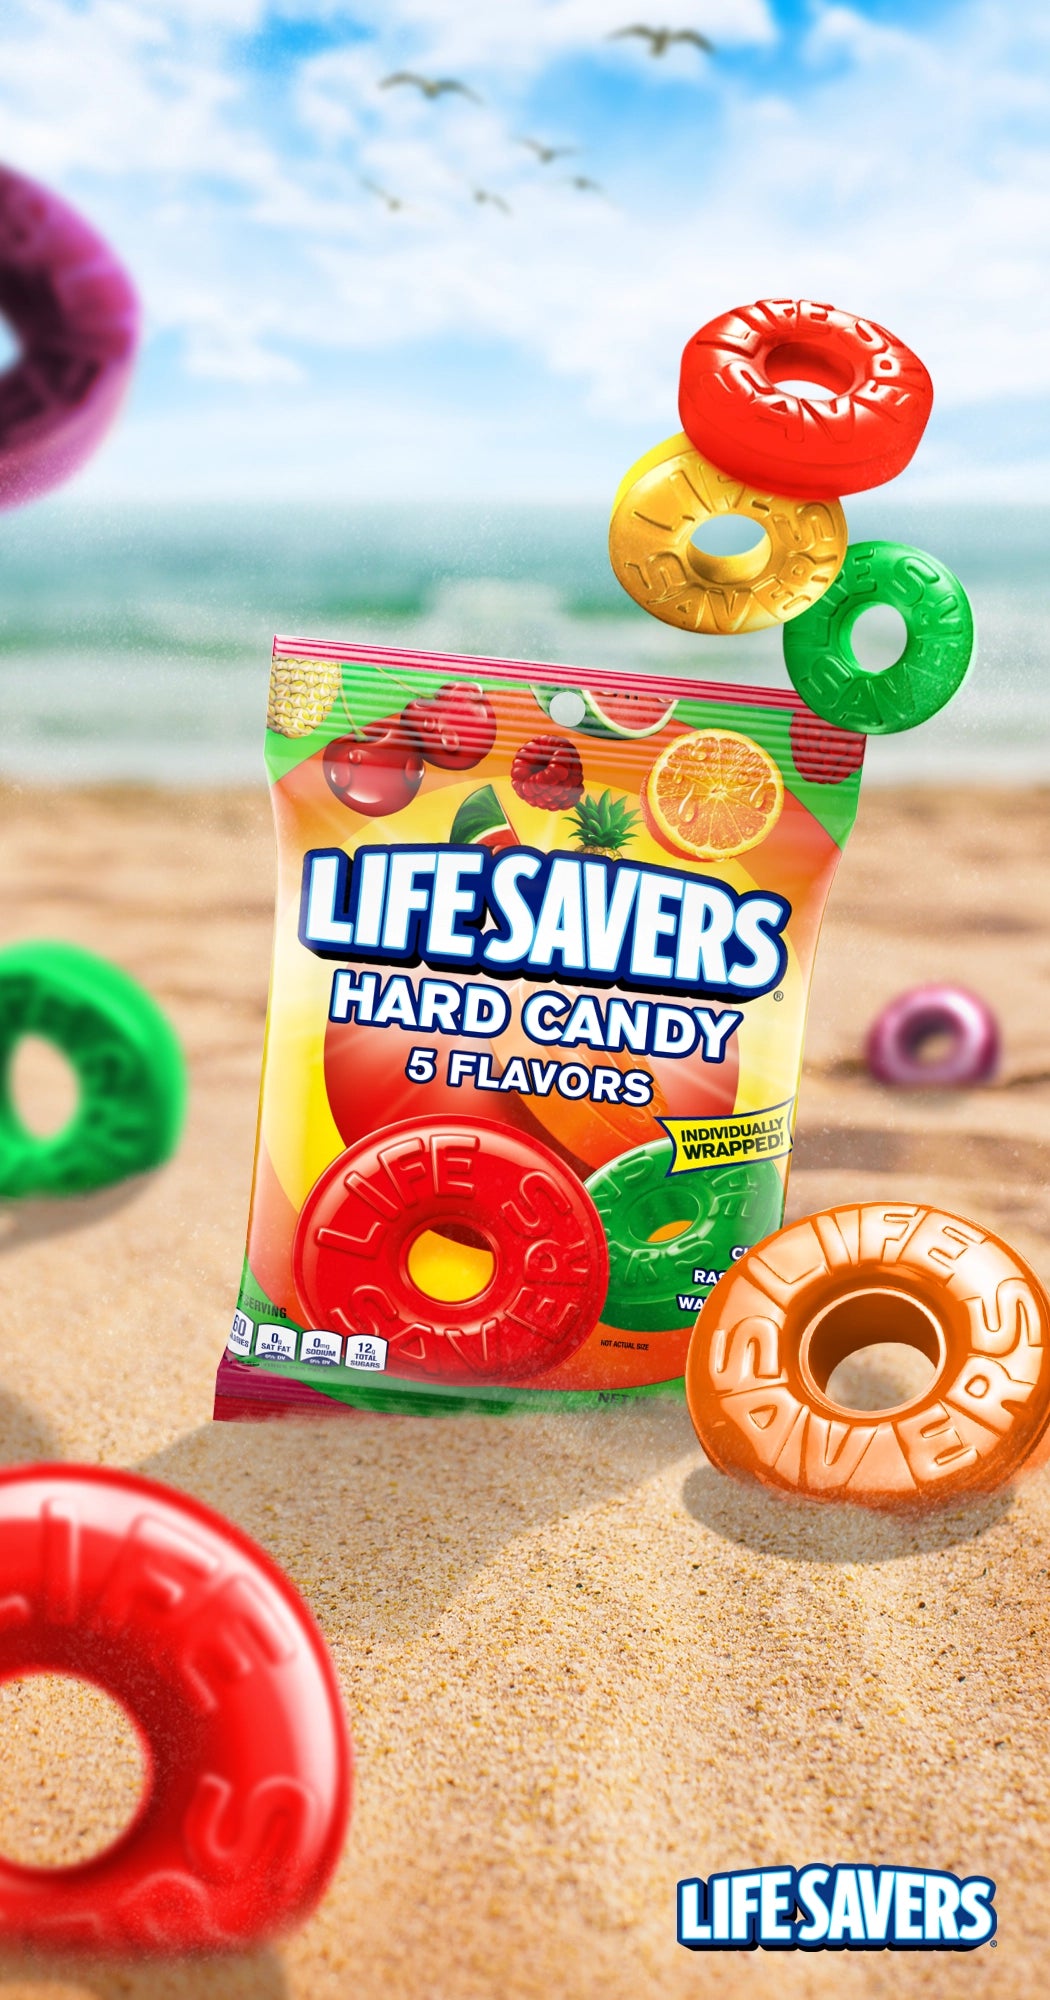 Life Savers in collection Banner